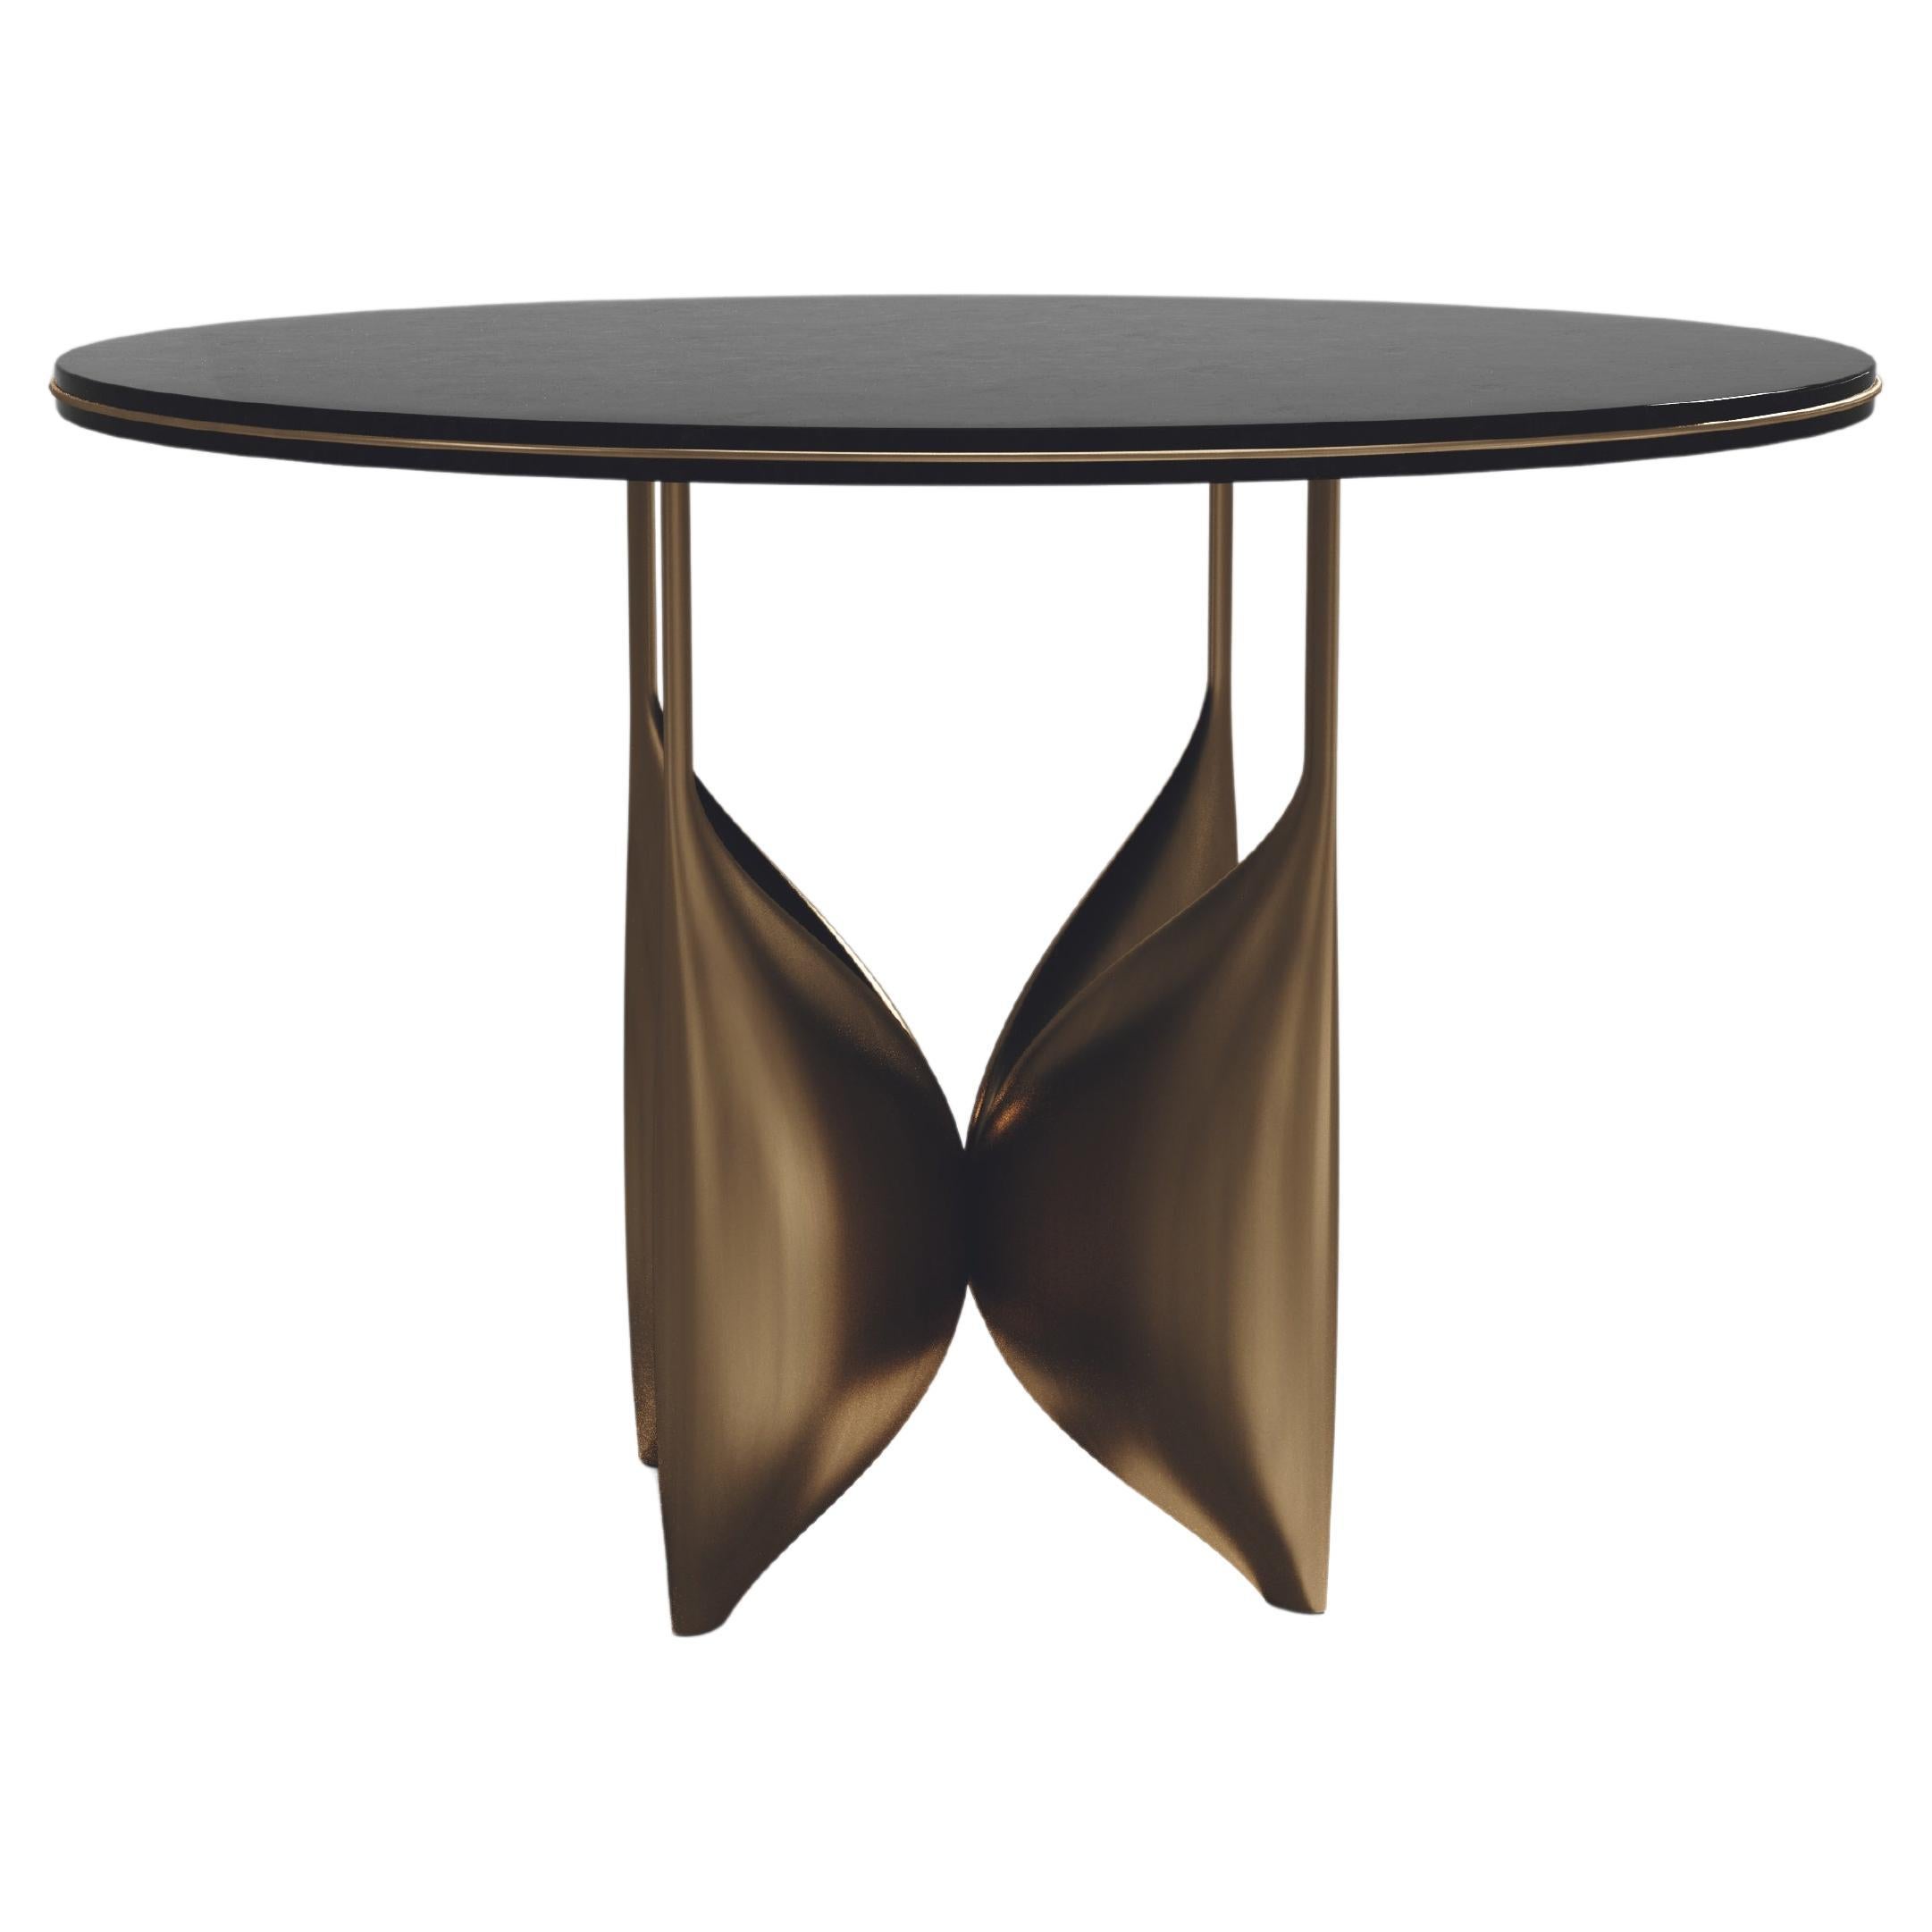 Shell Breakfast Table with Bronze Patina Brass Details by Kifu Paris